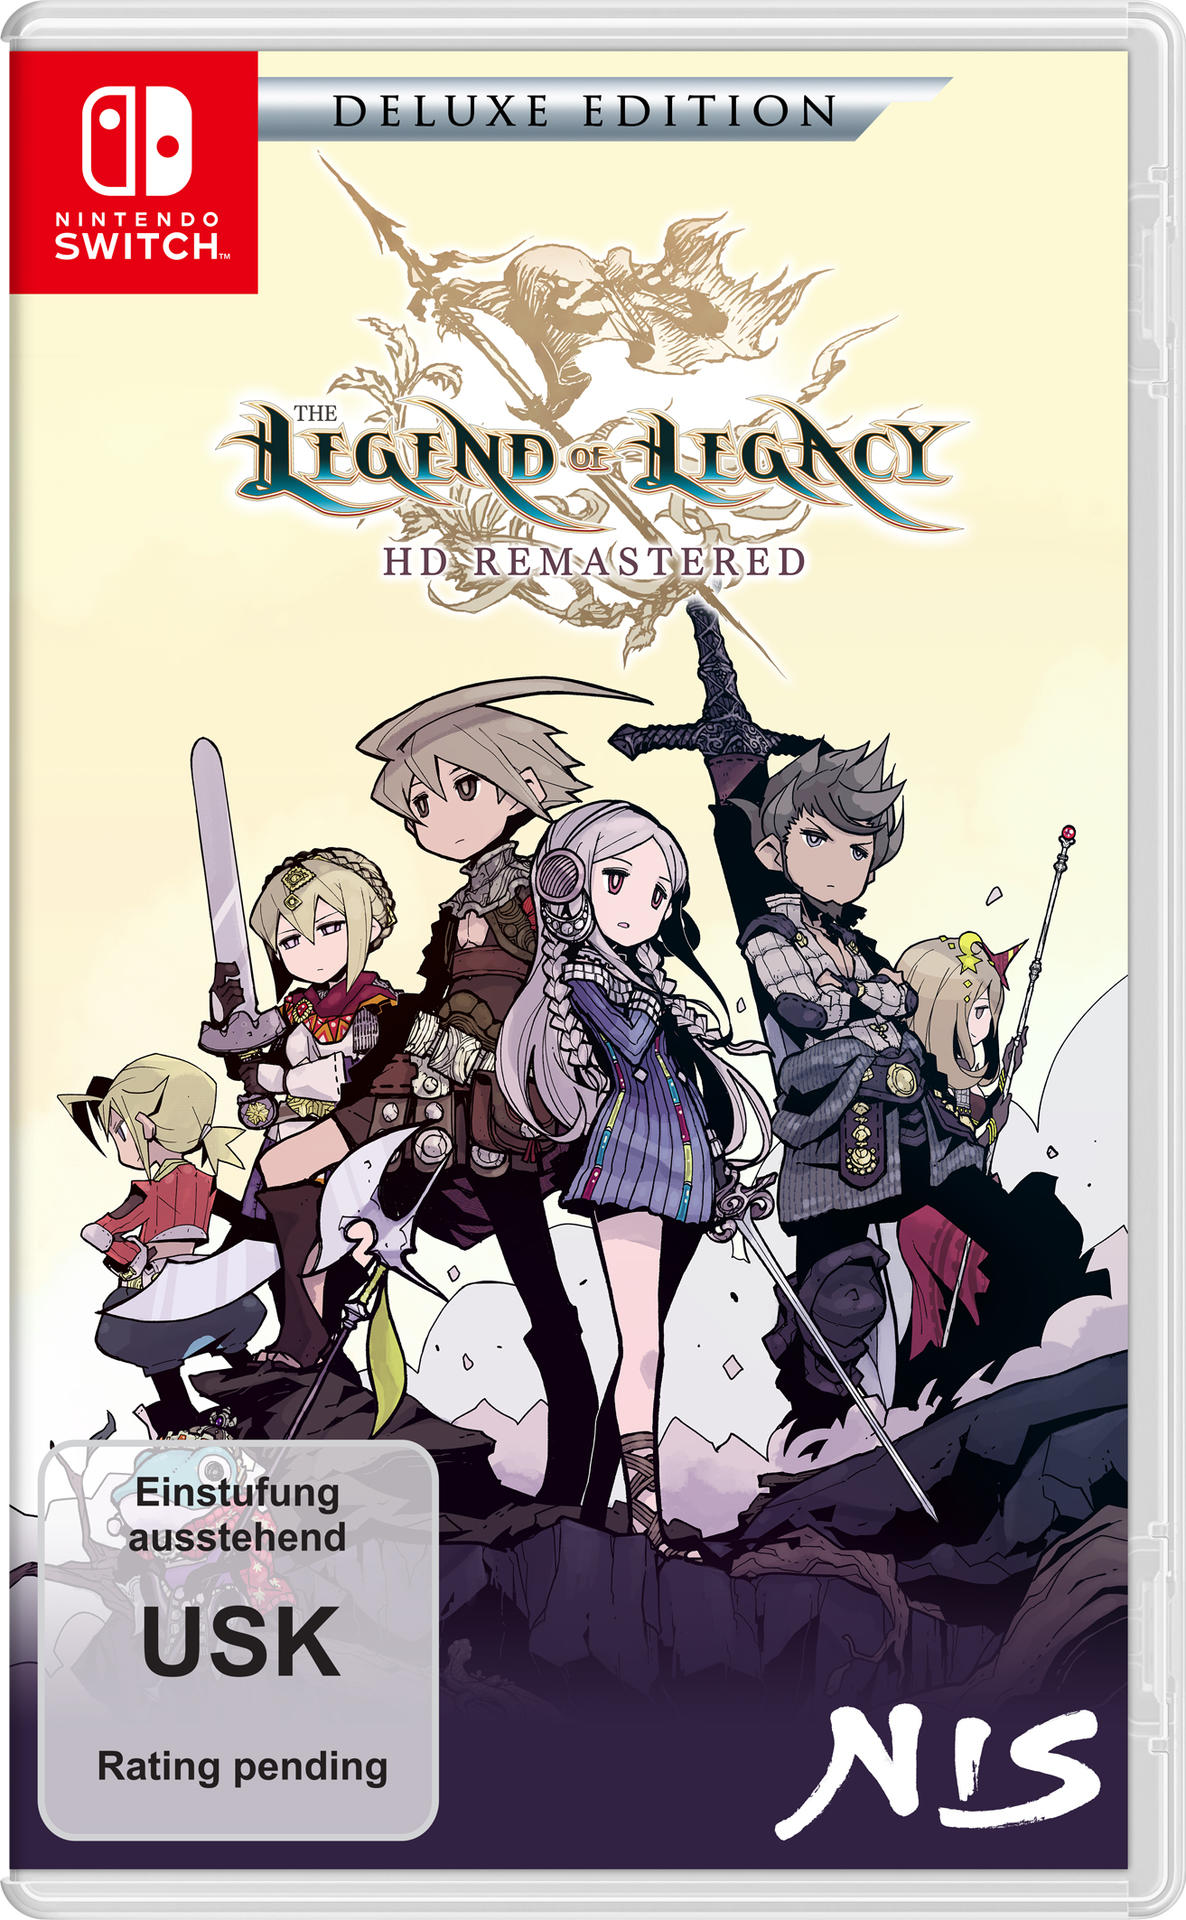 The Legend of Legacy HD - Remastered Switch] Deluxe - Edition [Nintendo